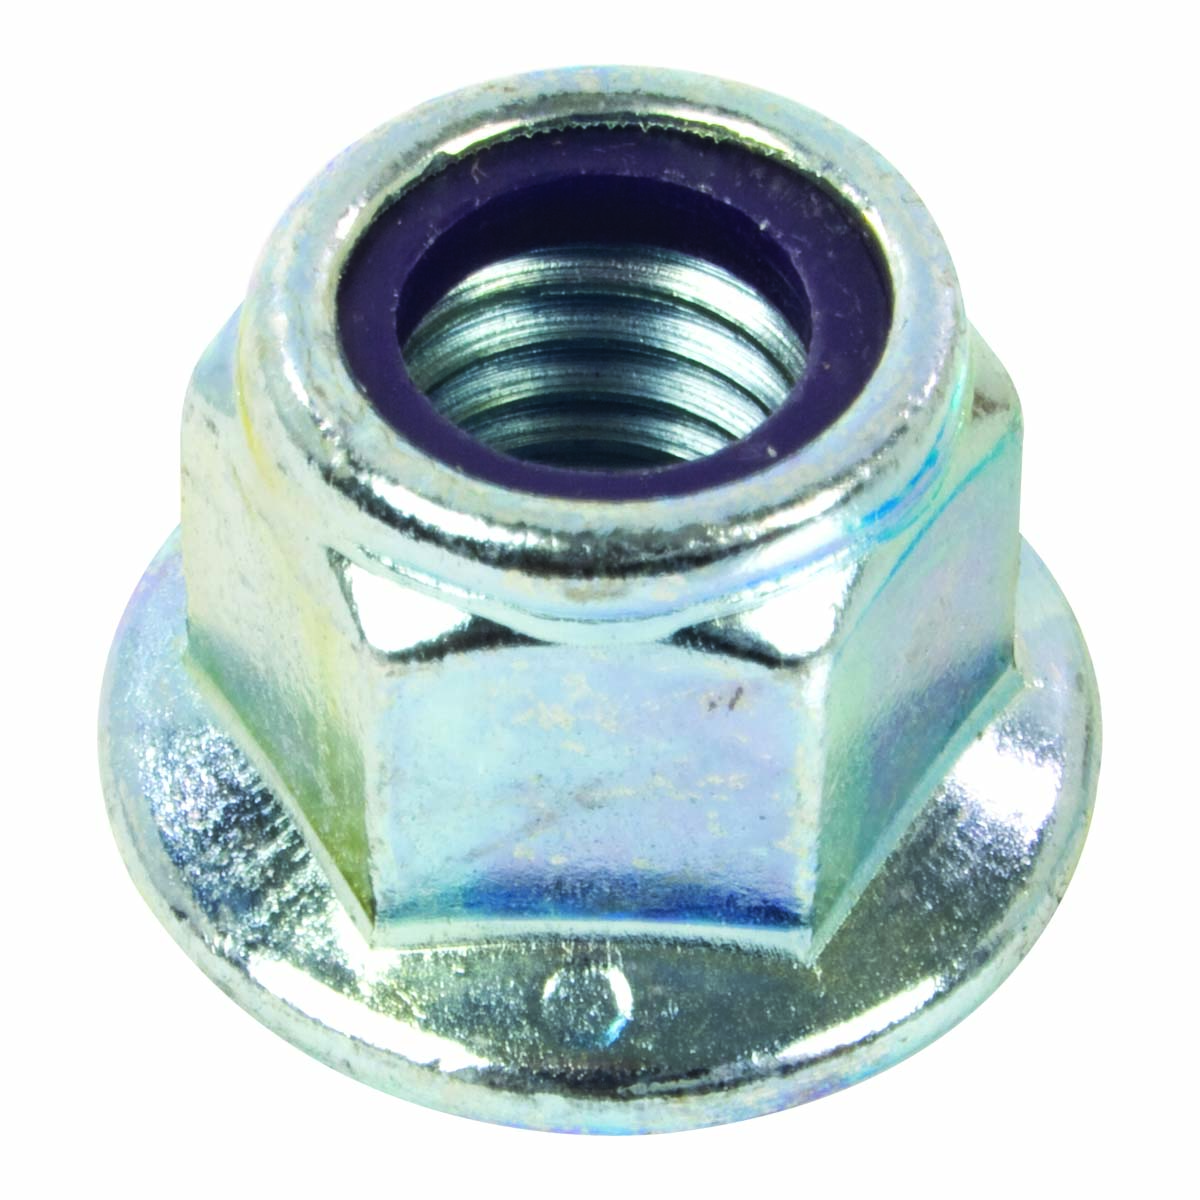 Stainless Steel  3/8-16  Flange Nut Box of 50 